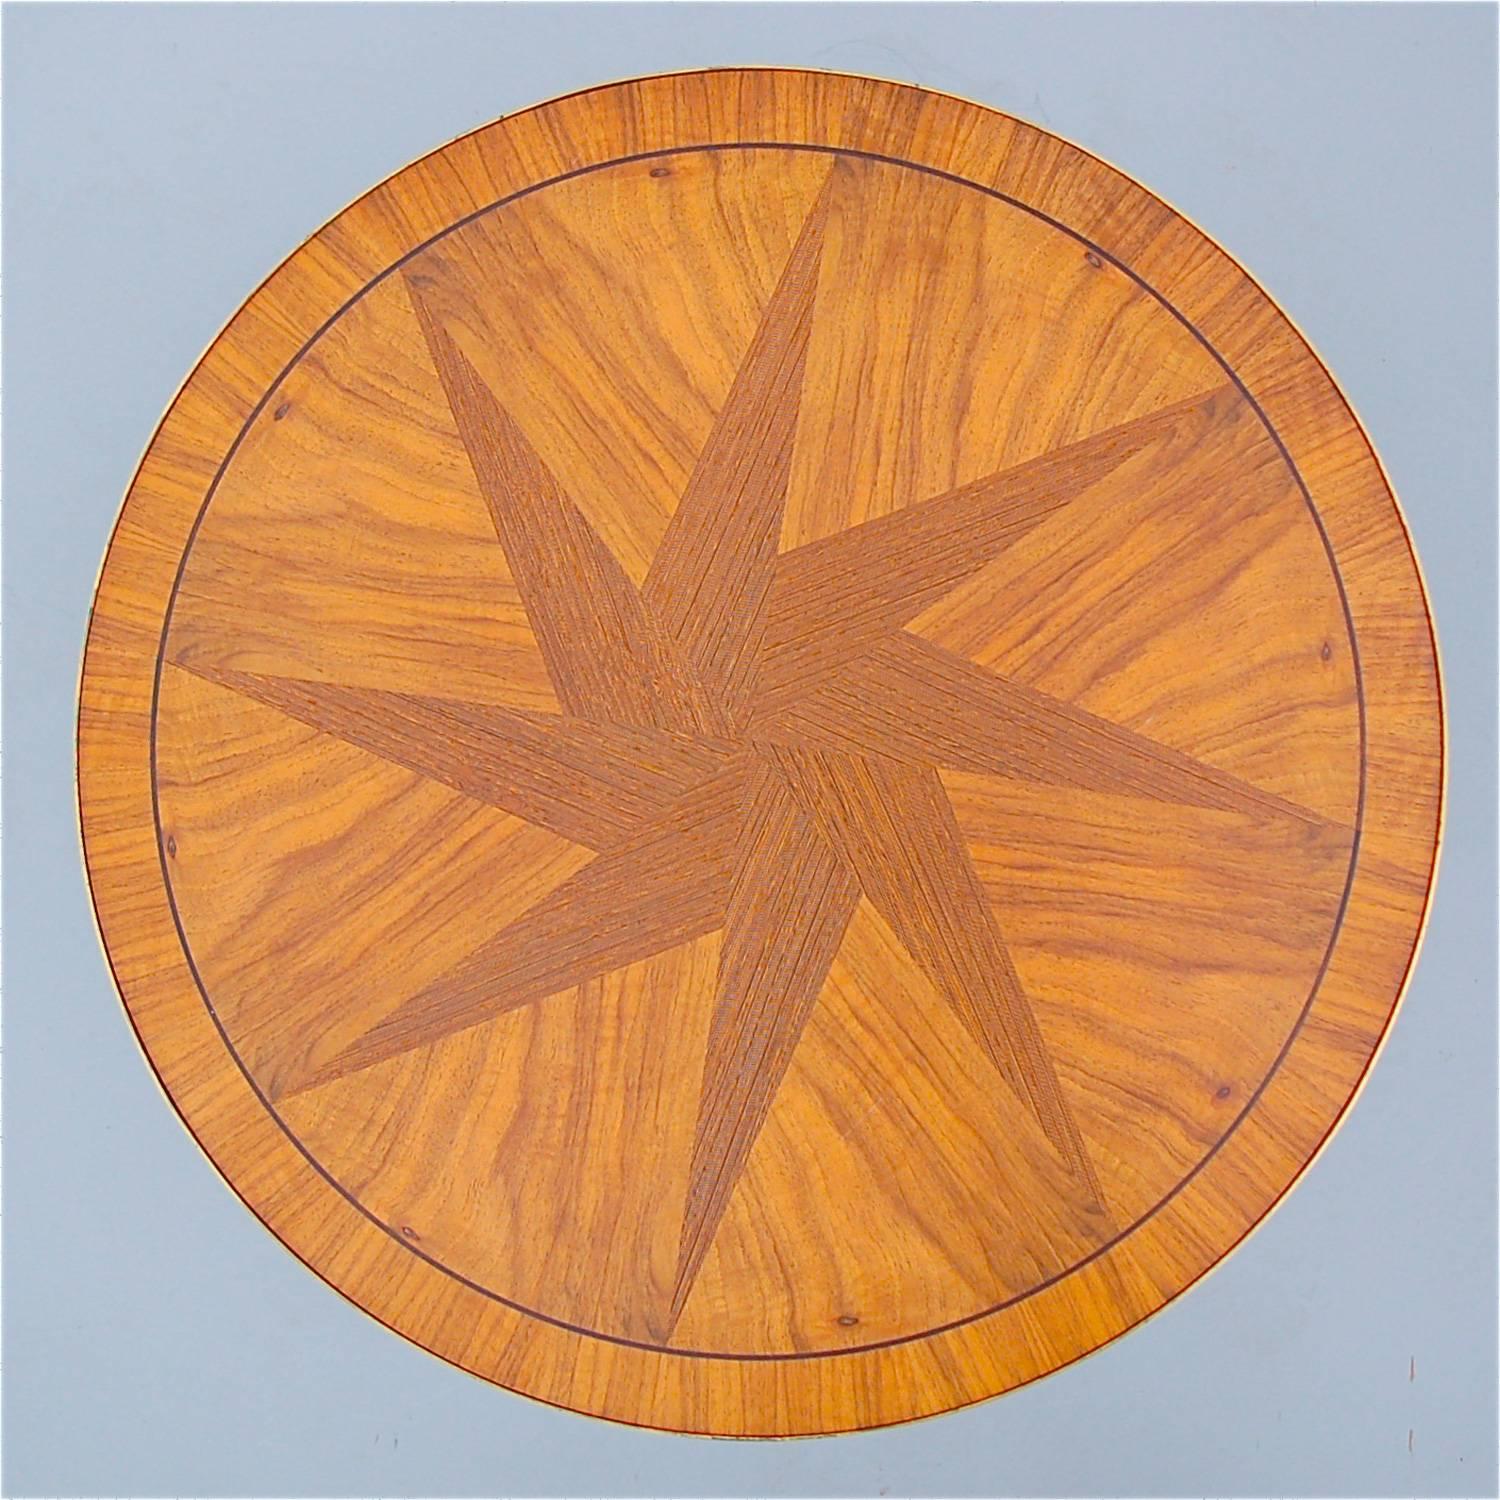 Elegant three-legged side table with decorative wood inlay in the shape of a star. The use of different shades of color and wood grain give the tabletop a very dynamic appearance. The edge has a brass trim, adding a wonderful highlight and touch of